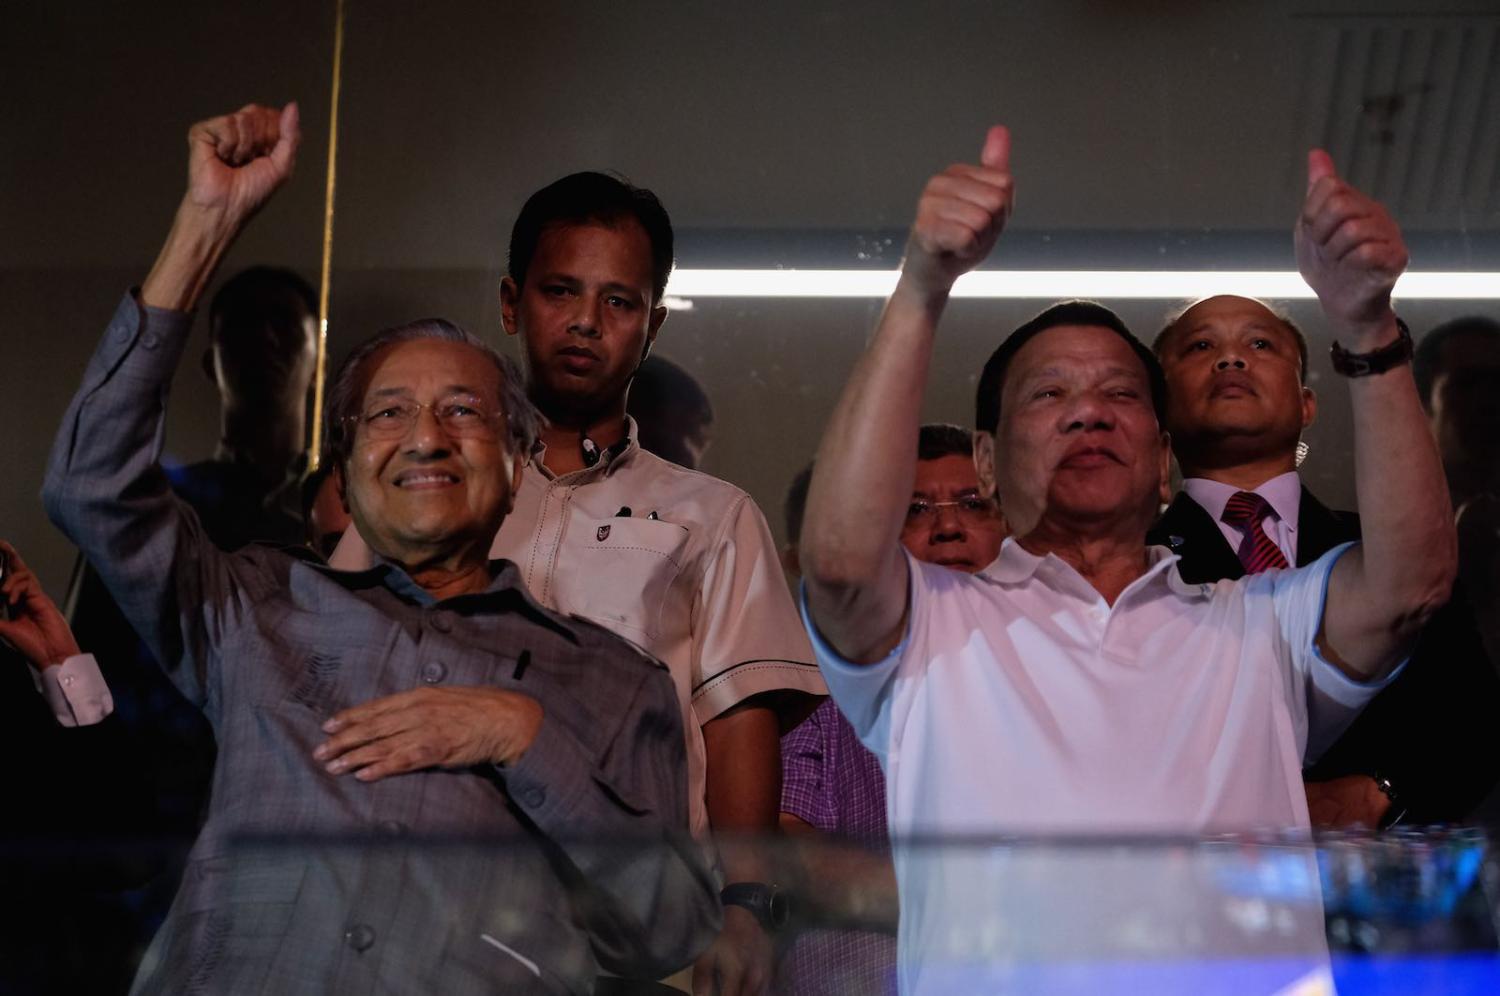 Thumb’s up: Malaysia's Mahathir Mohamed and the Philippines’ Rodrigo Duterte cheer in a boxing match in 2018 (Photo: Mohd Samsul Mohd Said/Getty)